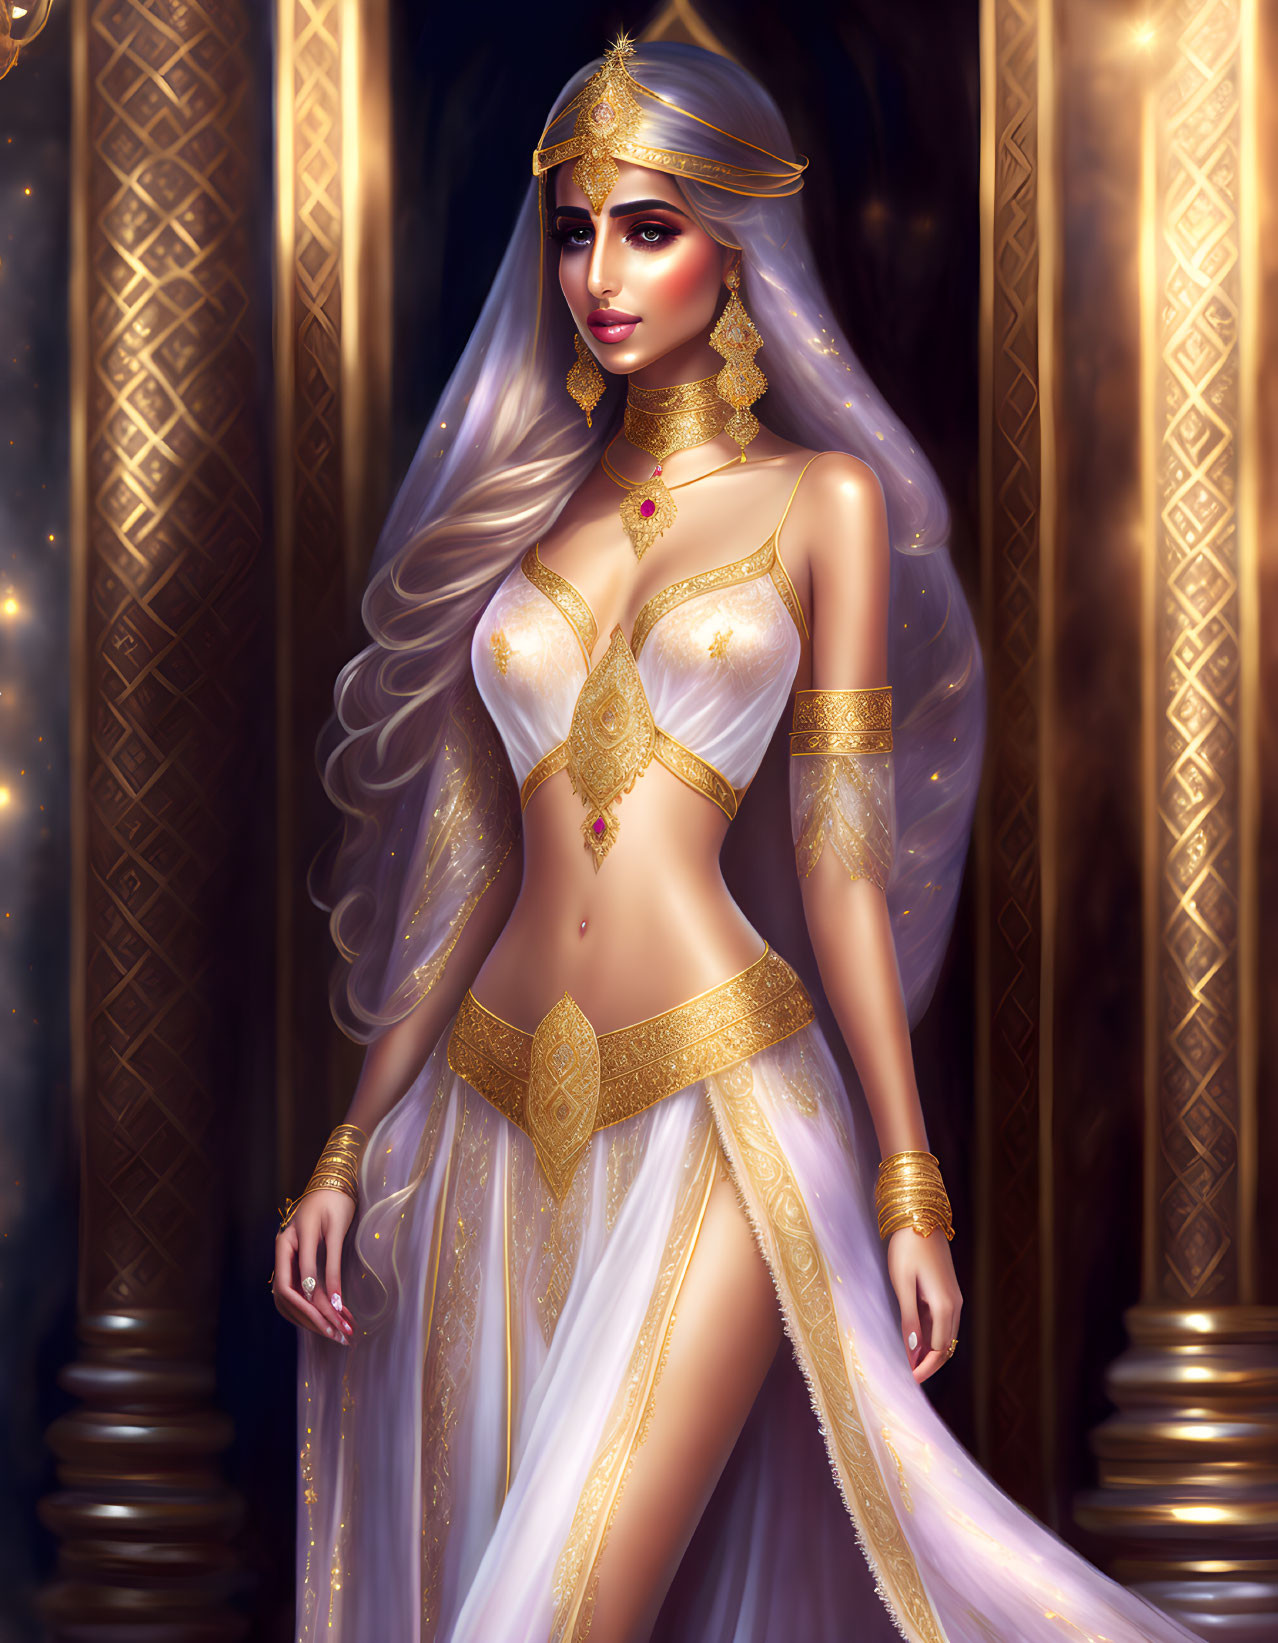 Regal woman in golden and white attire in a palatial setting